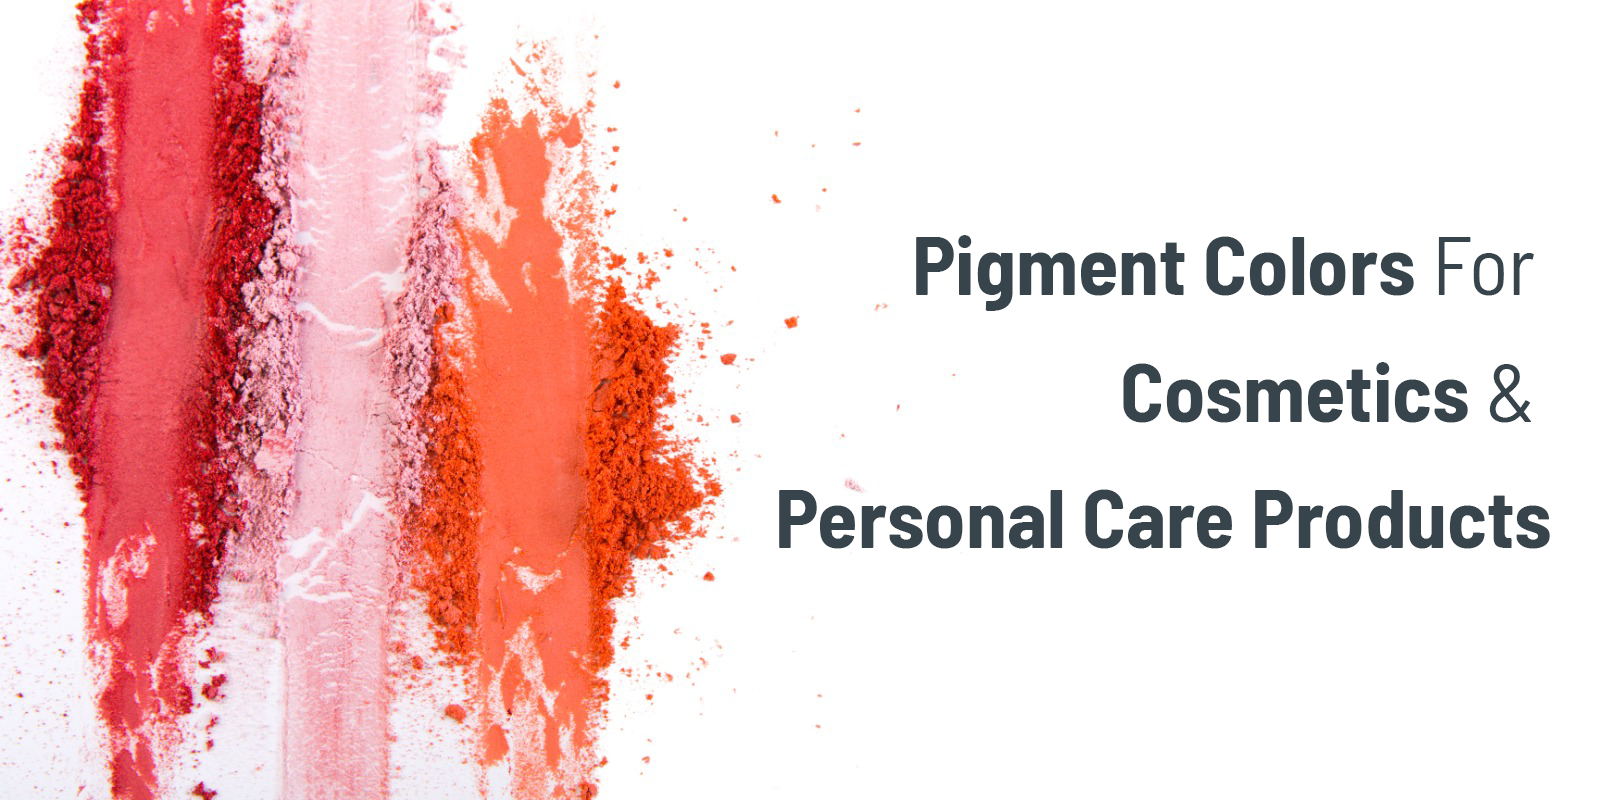 Pigment colors for Cosmetics and Personal Care Products